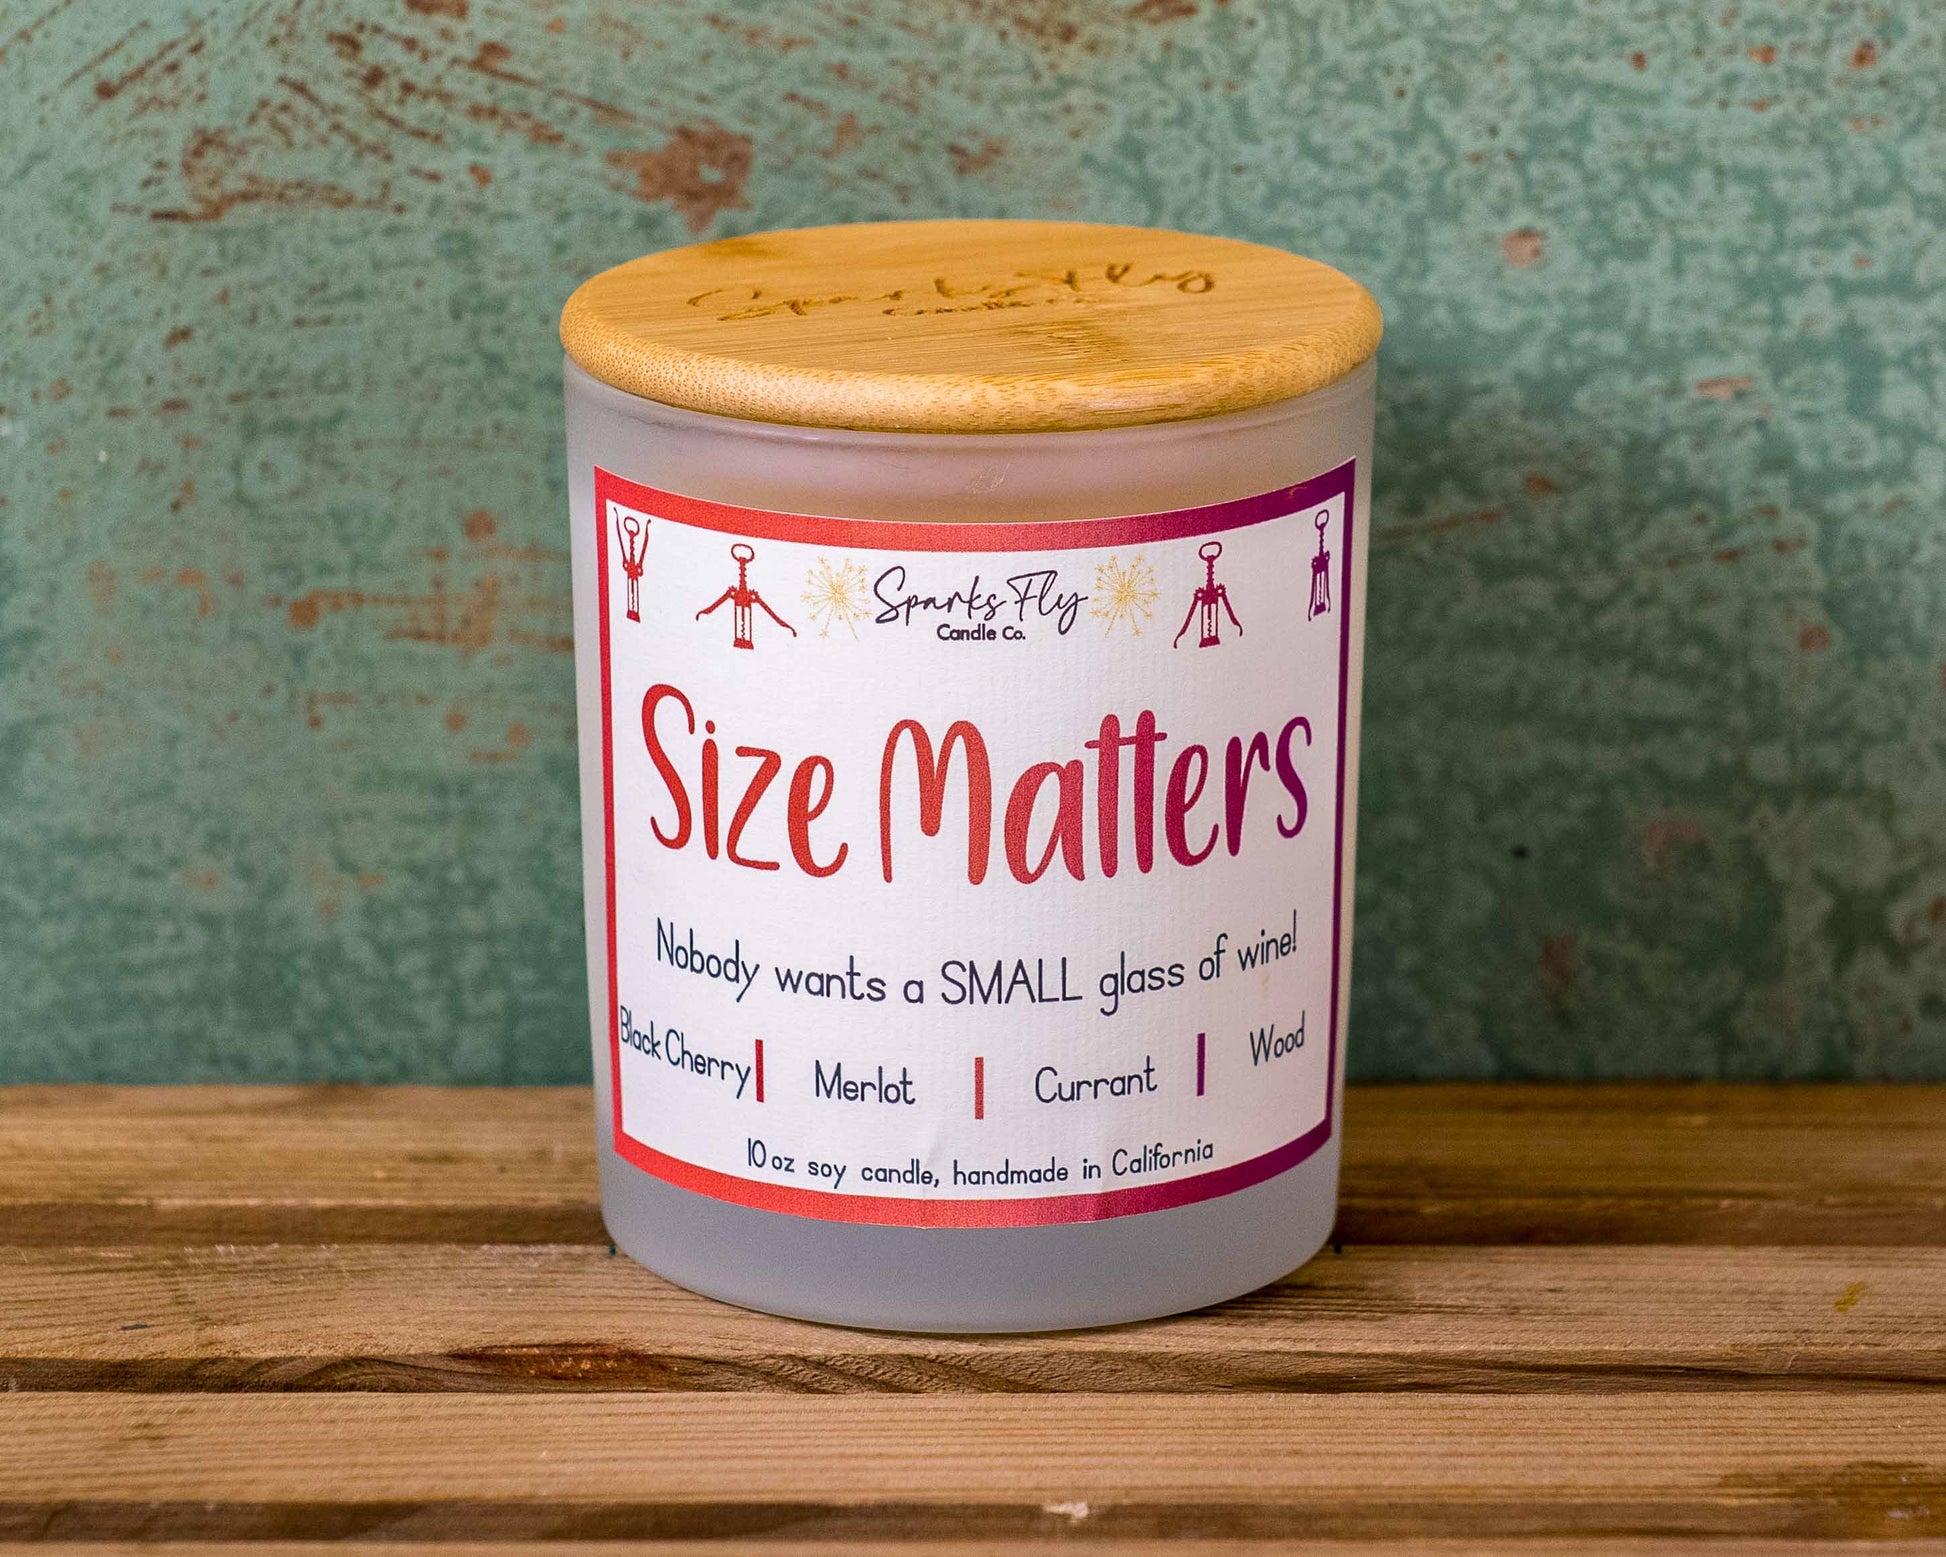 Size Matters Candle - A playful nod to wine lovers who know bigger is better.